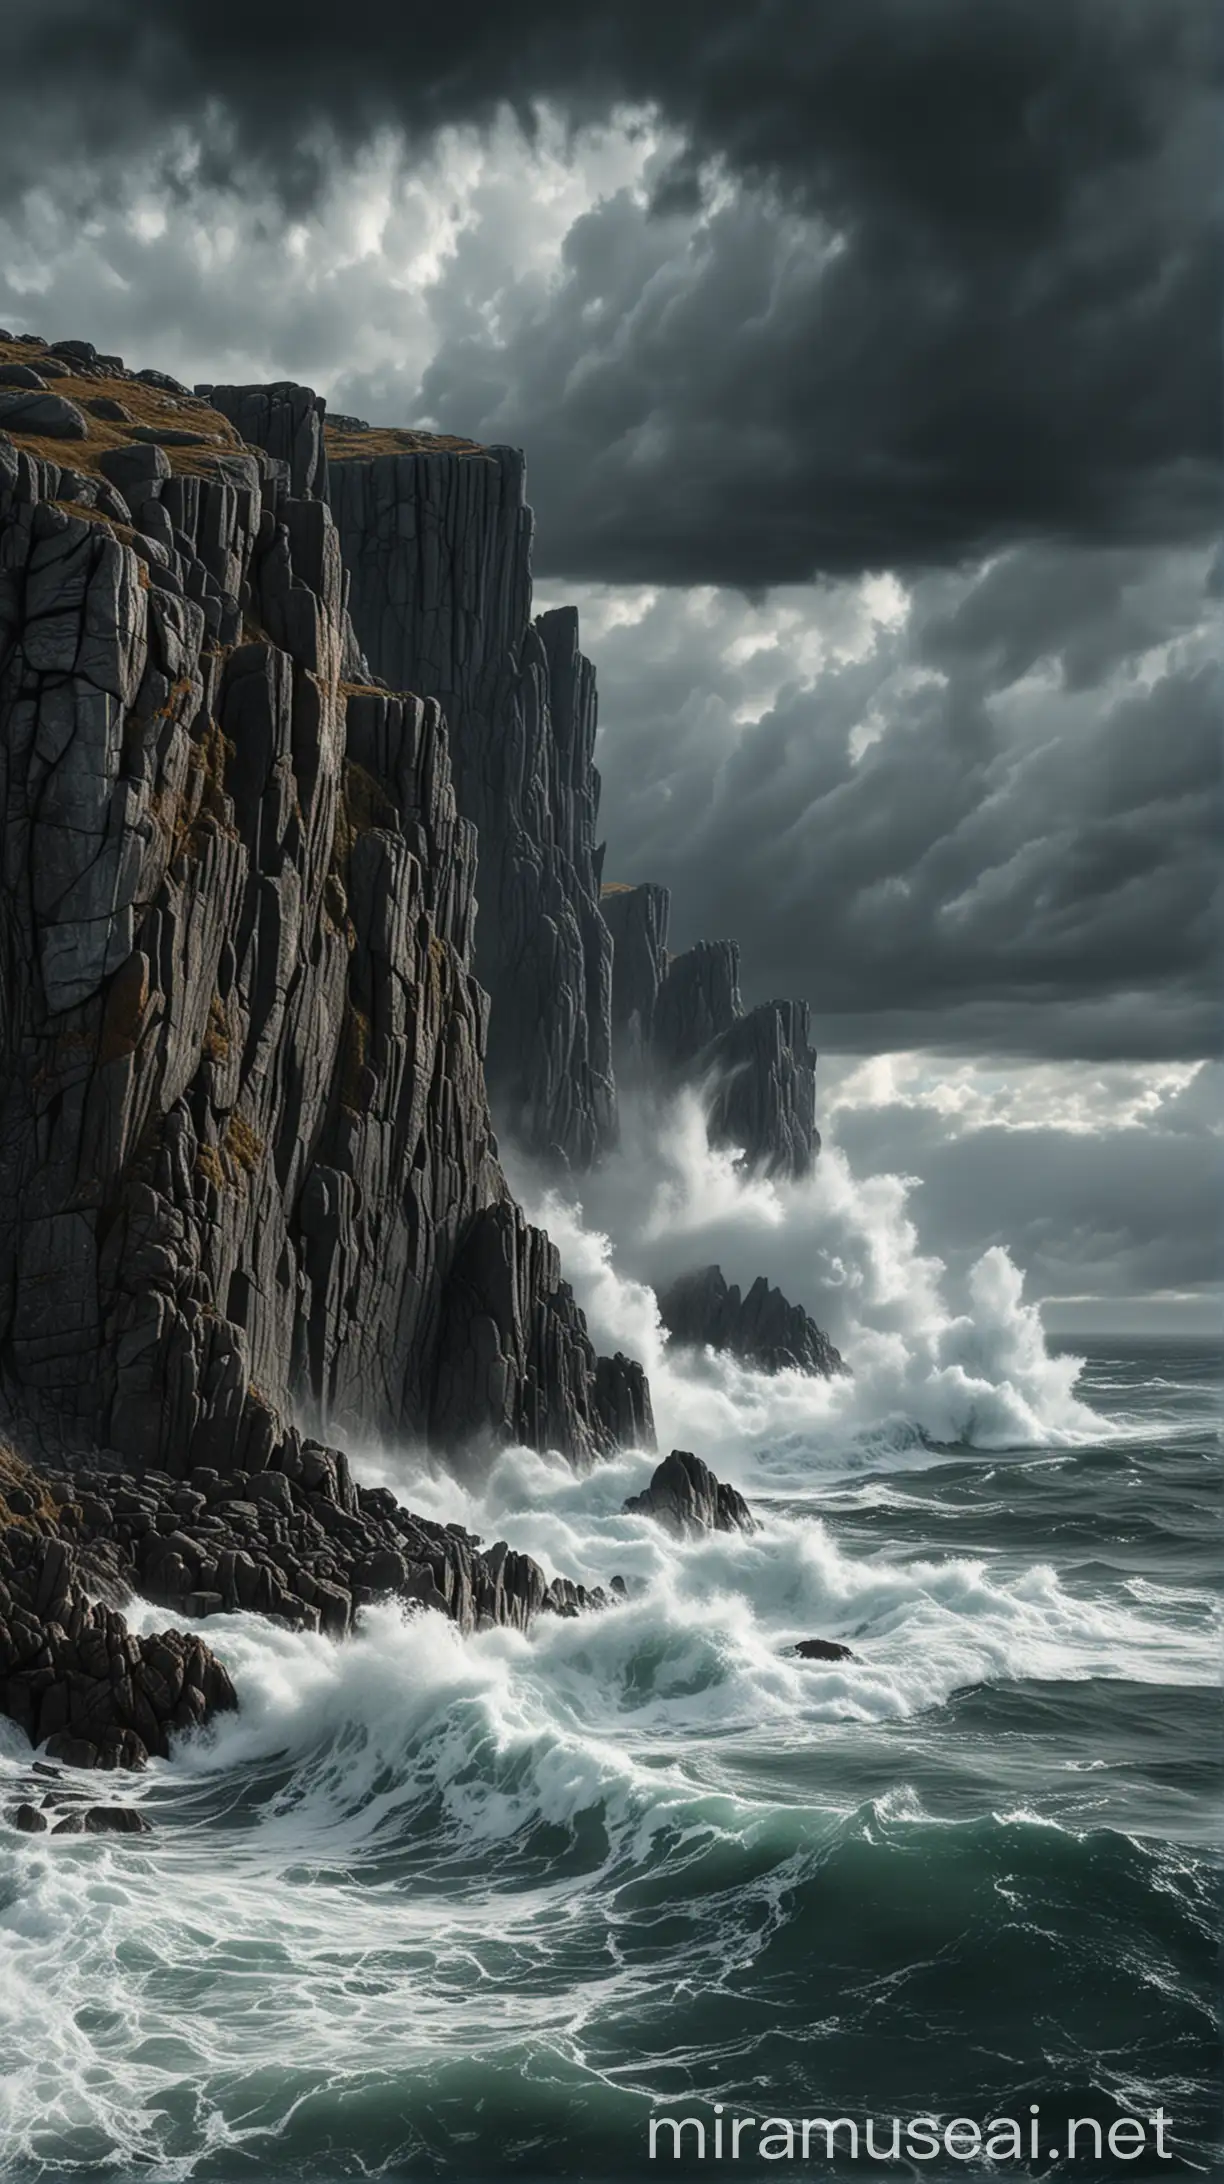 A dramatic landscape of rugged Nordic cliffs, with waves crashing against the shore and storm clouds brewing overhead. hyper realistic